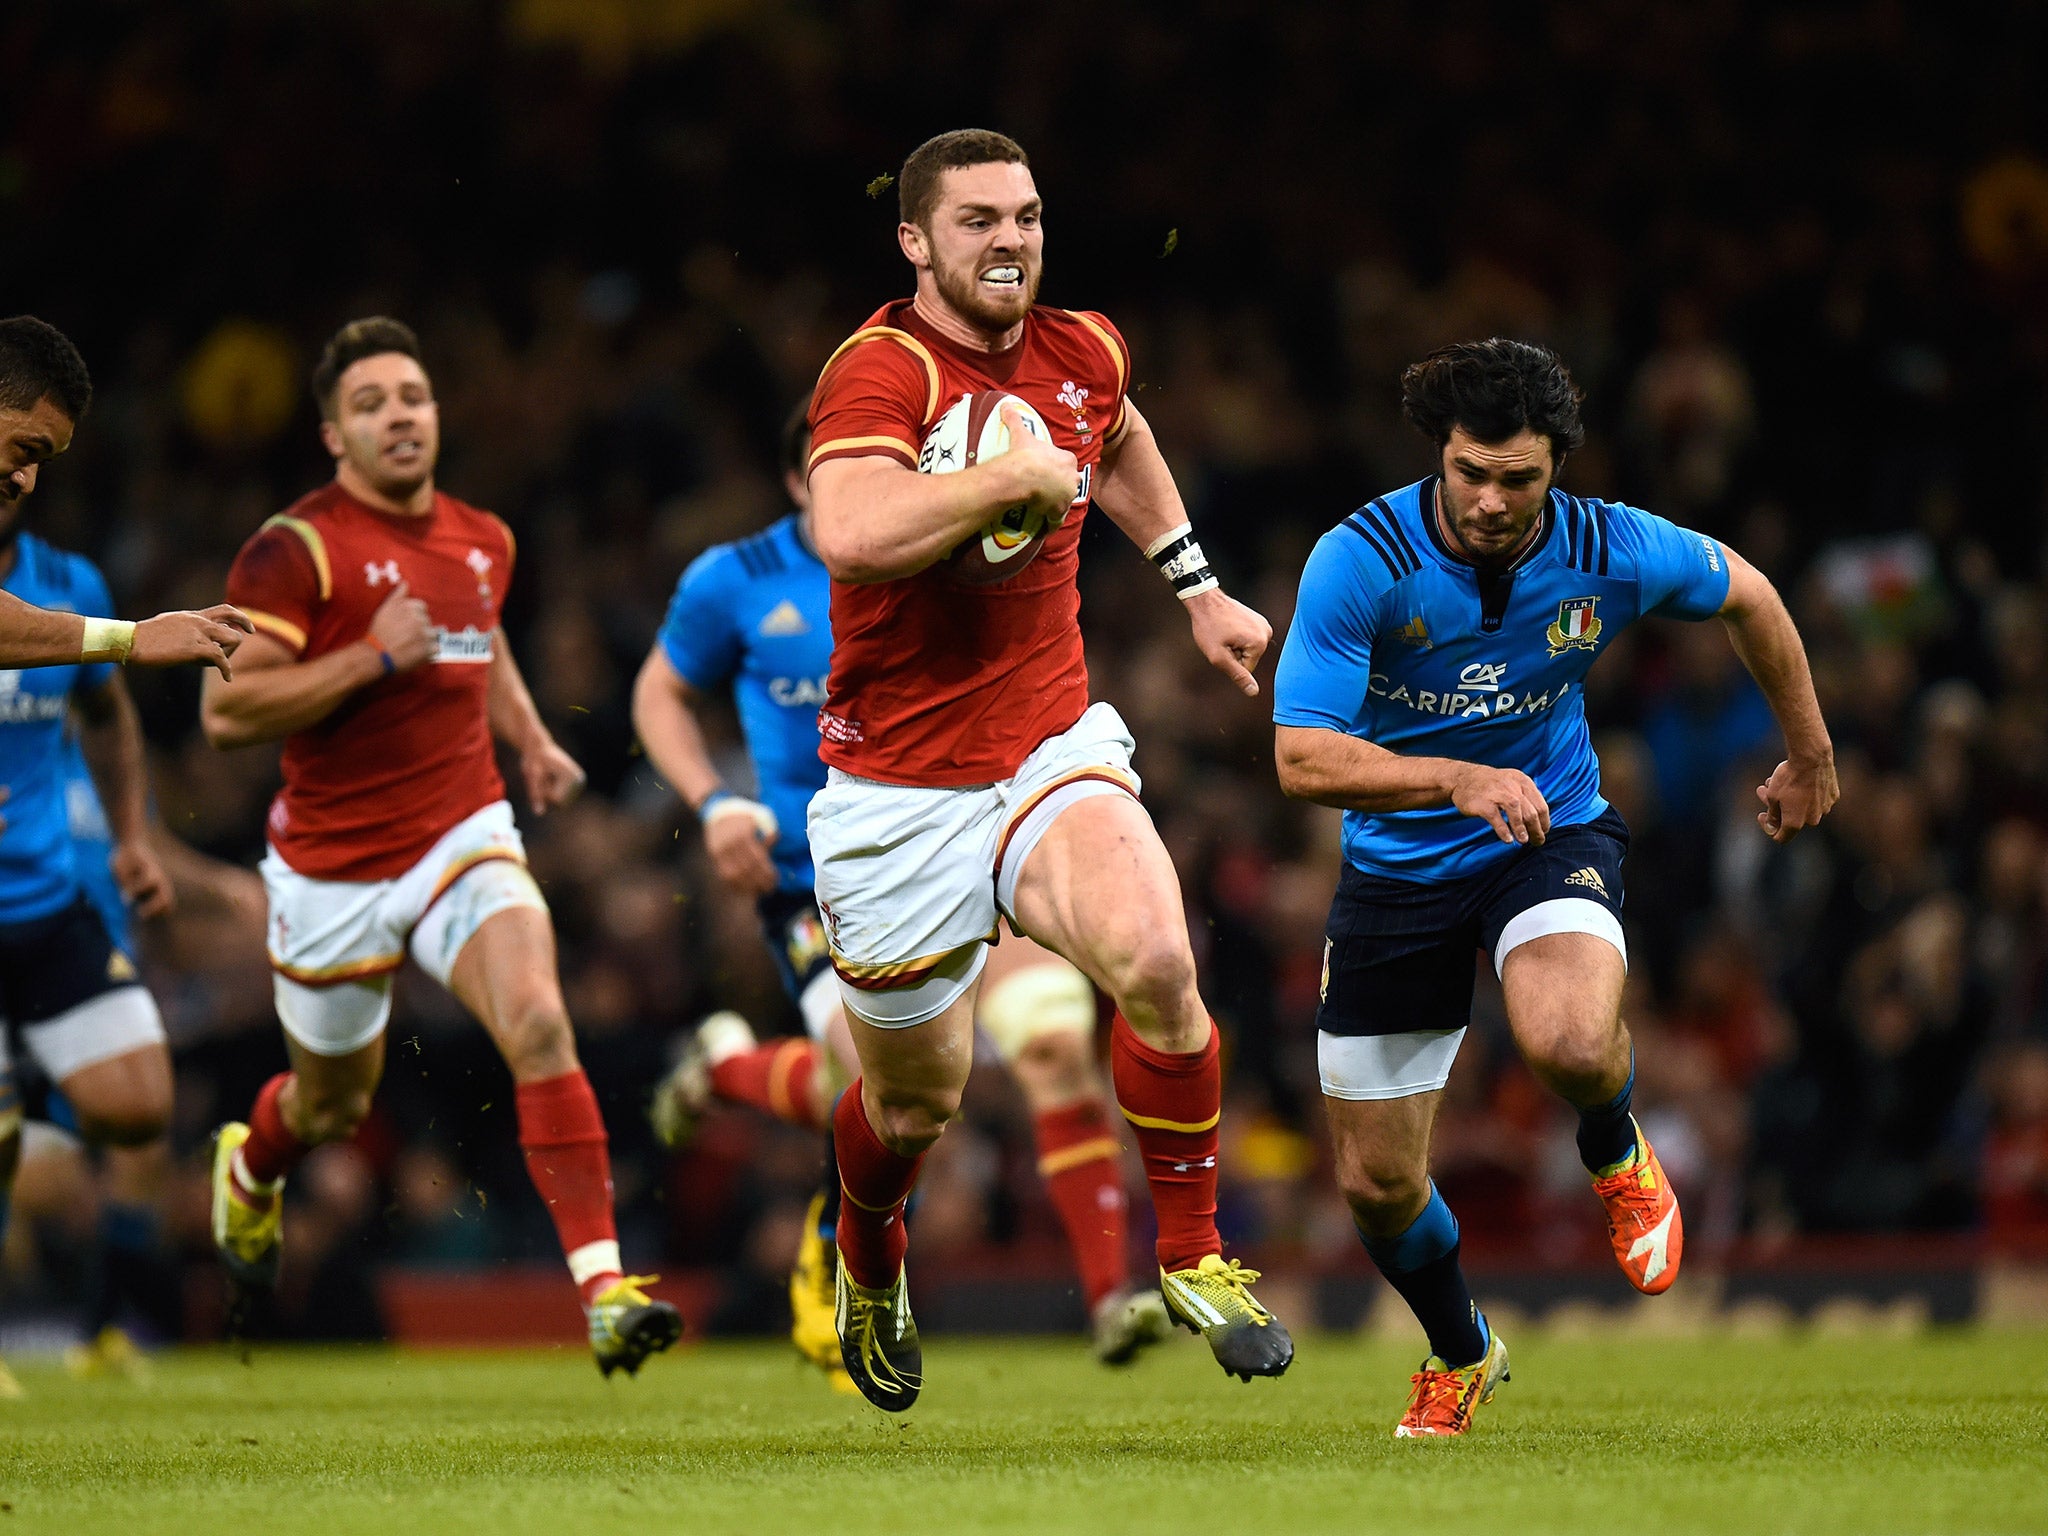 George North bursts through the Italy defence to score a try